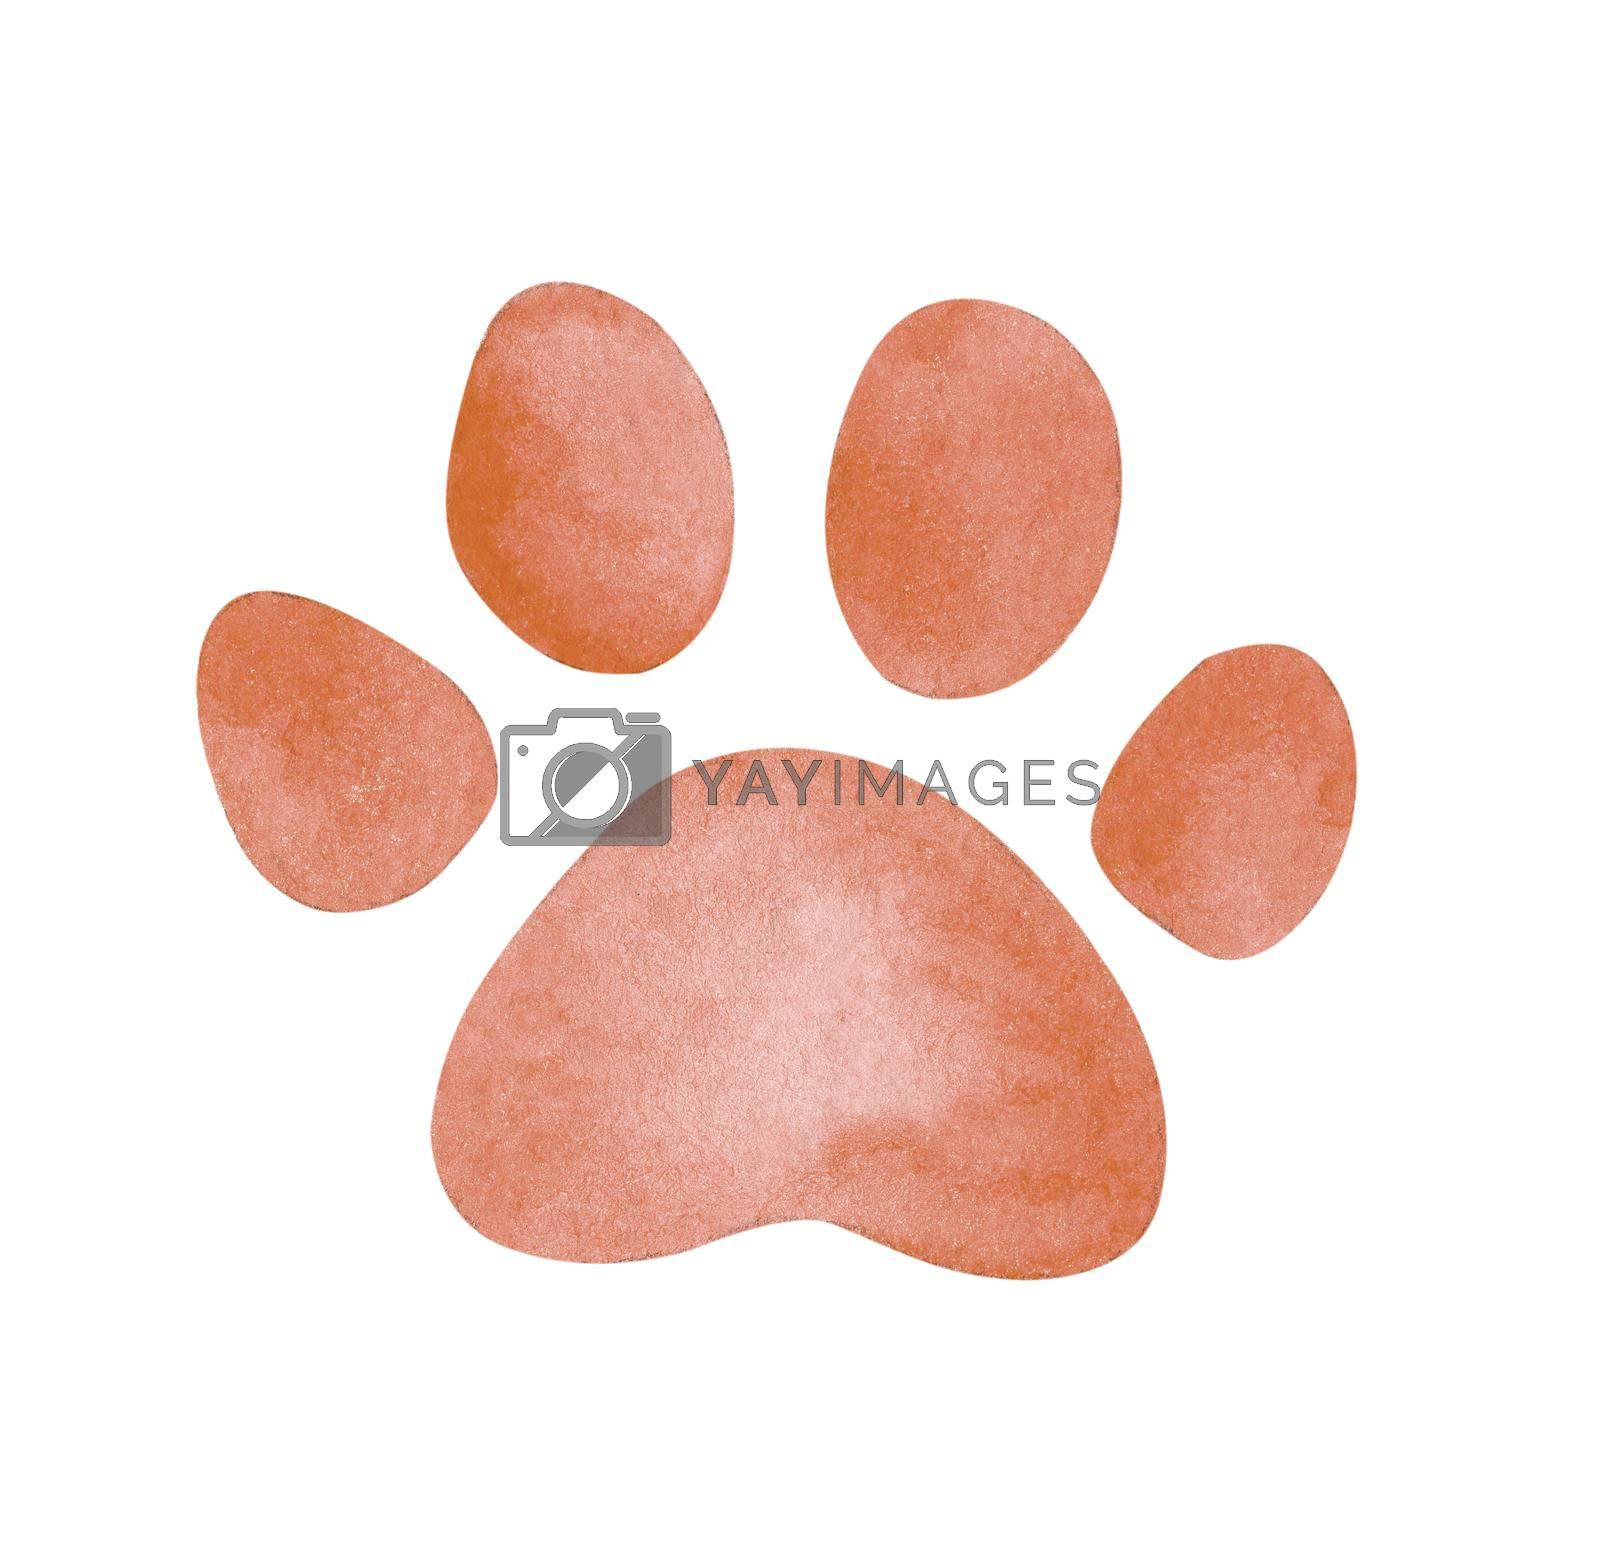 Royalty free image of Watercolor brown paw stain isolated on white by dreamloud